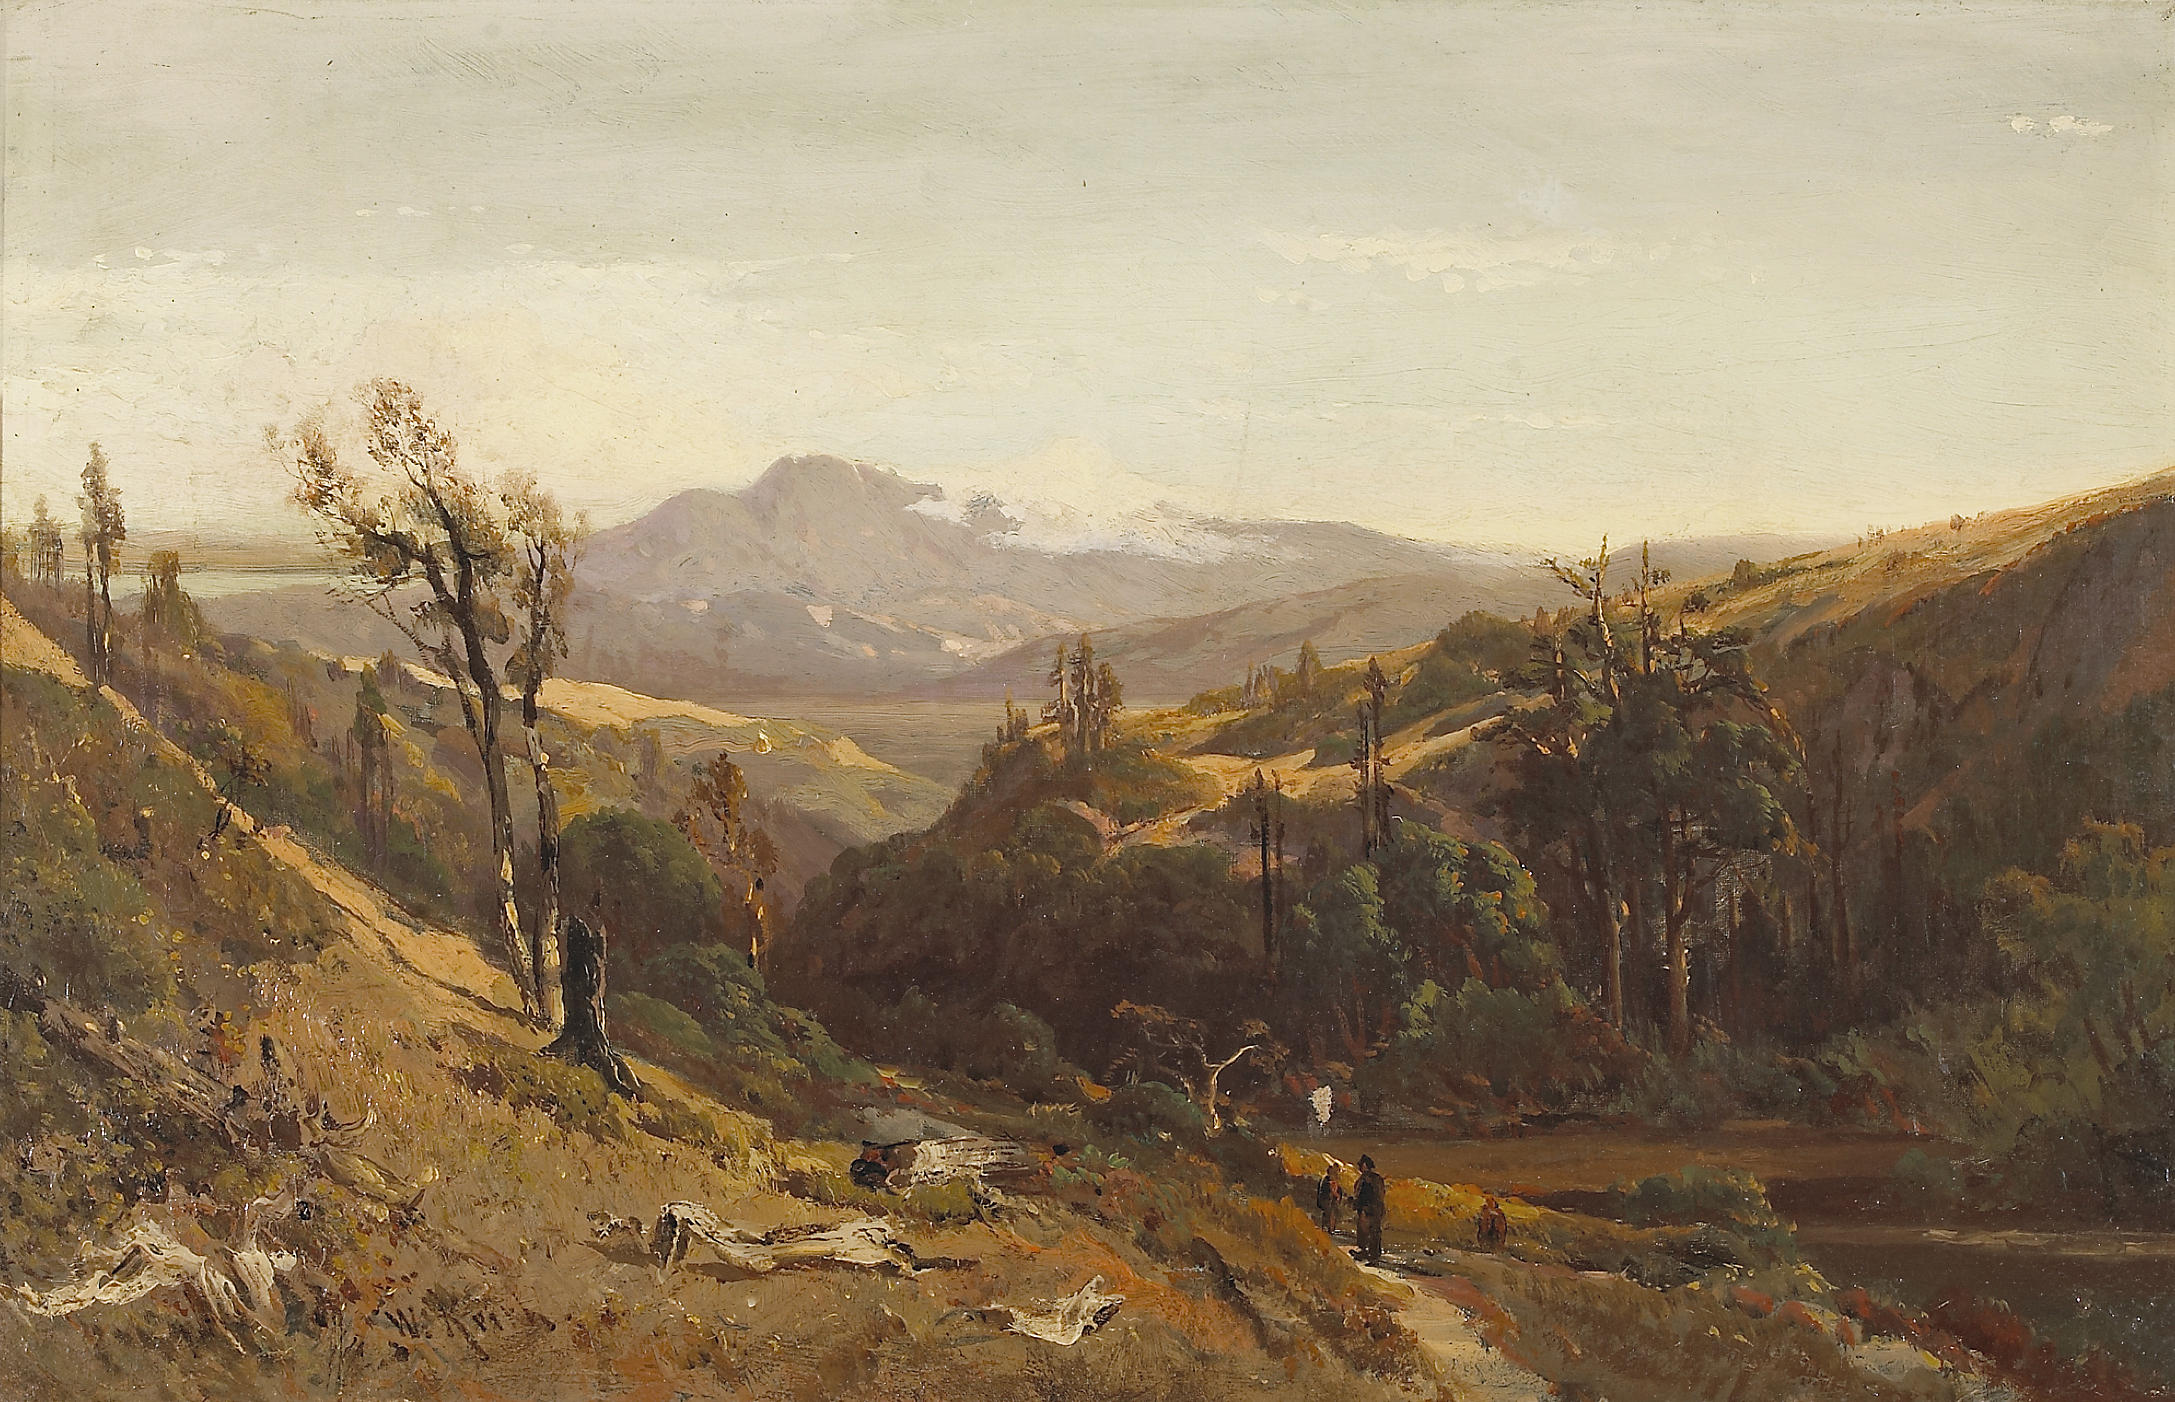 A Trail through the Hills with Mt Tamalpais Beyond by William Keith